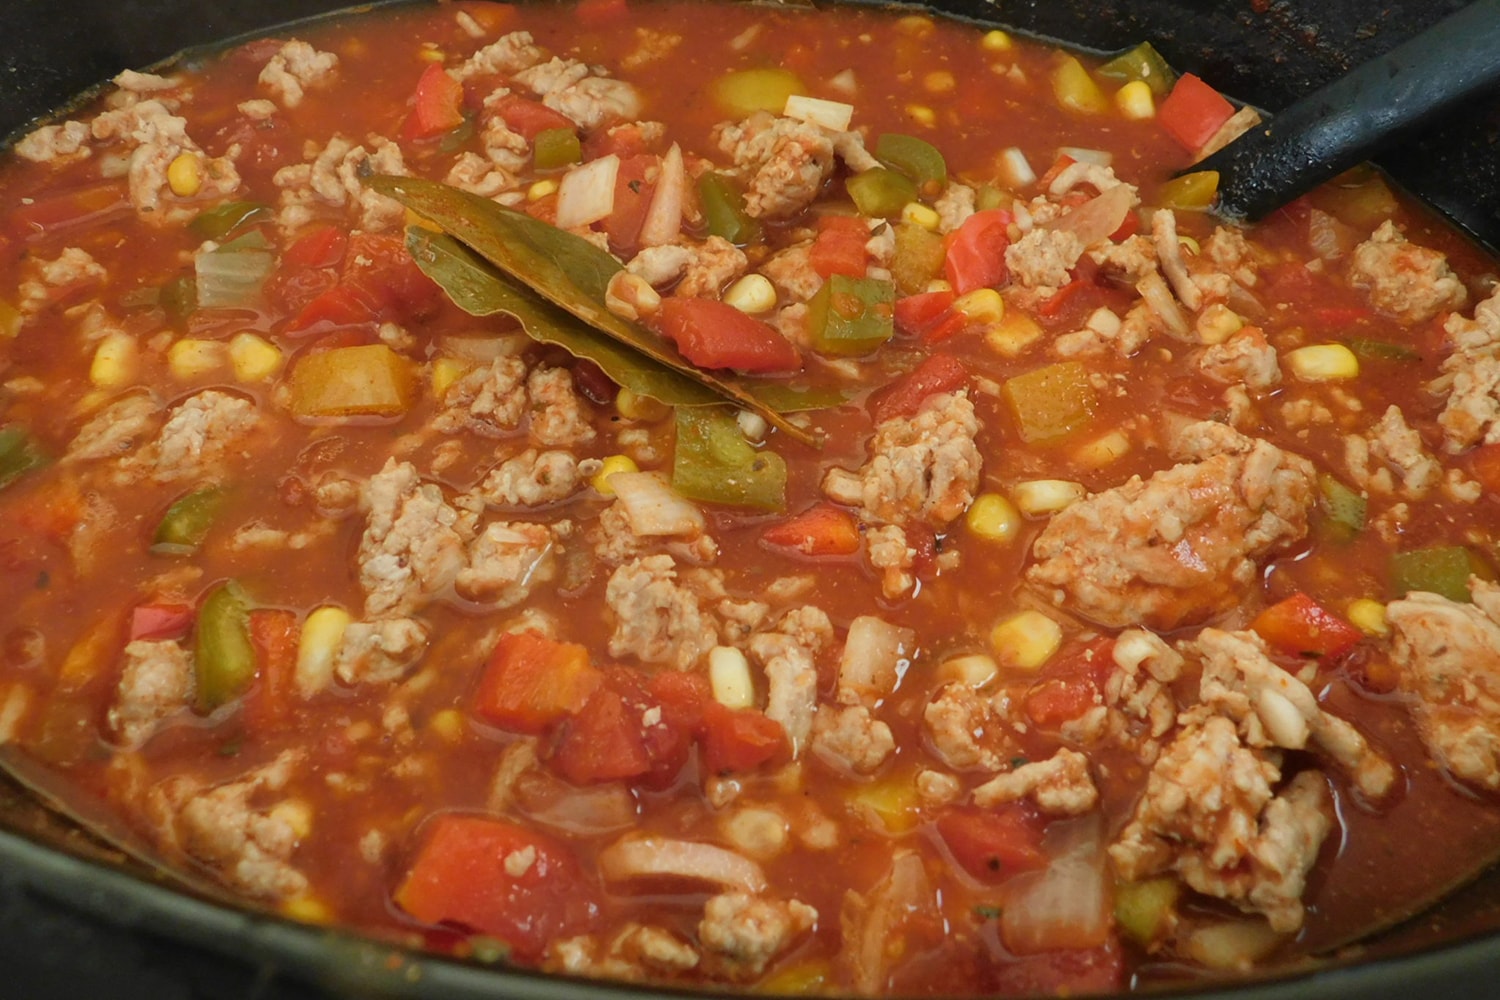 Weight Watchers Slow Cooker Chili in the crockpot with corn, chicken, and broth.